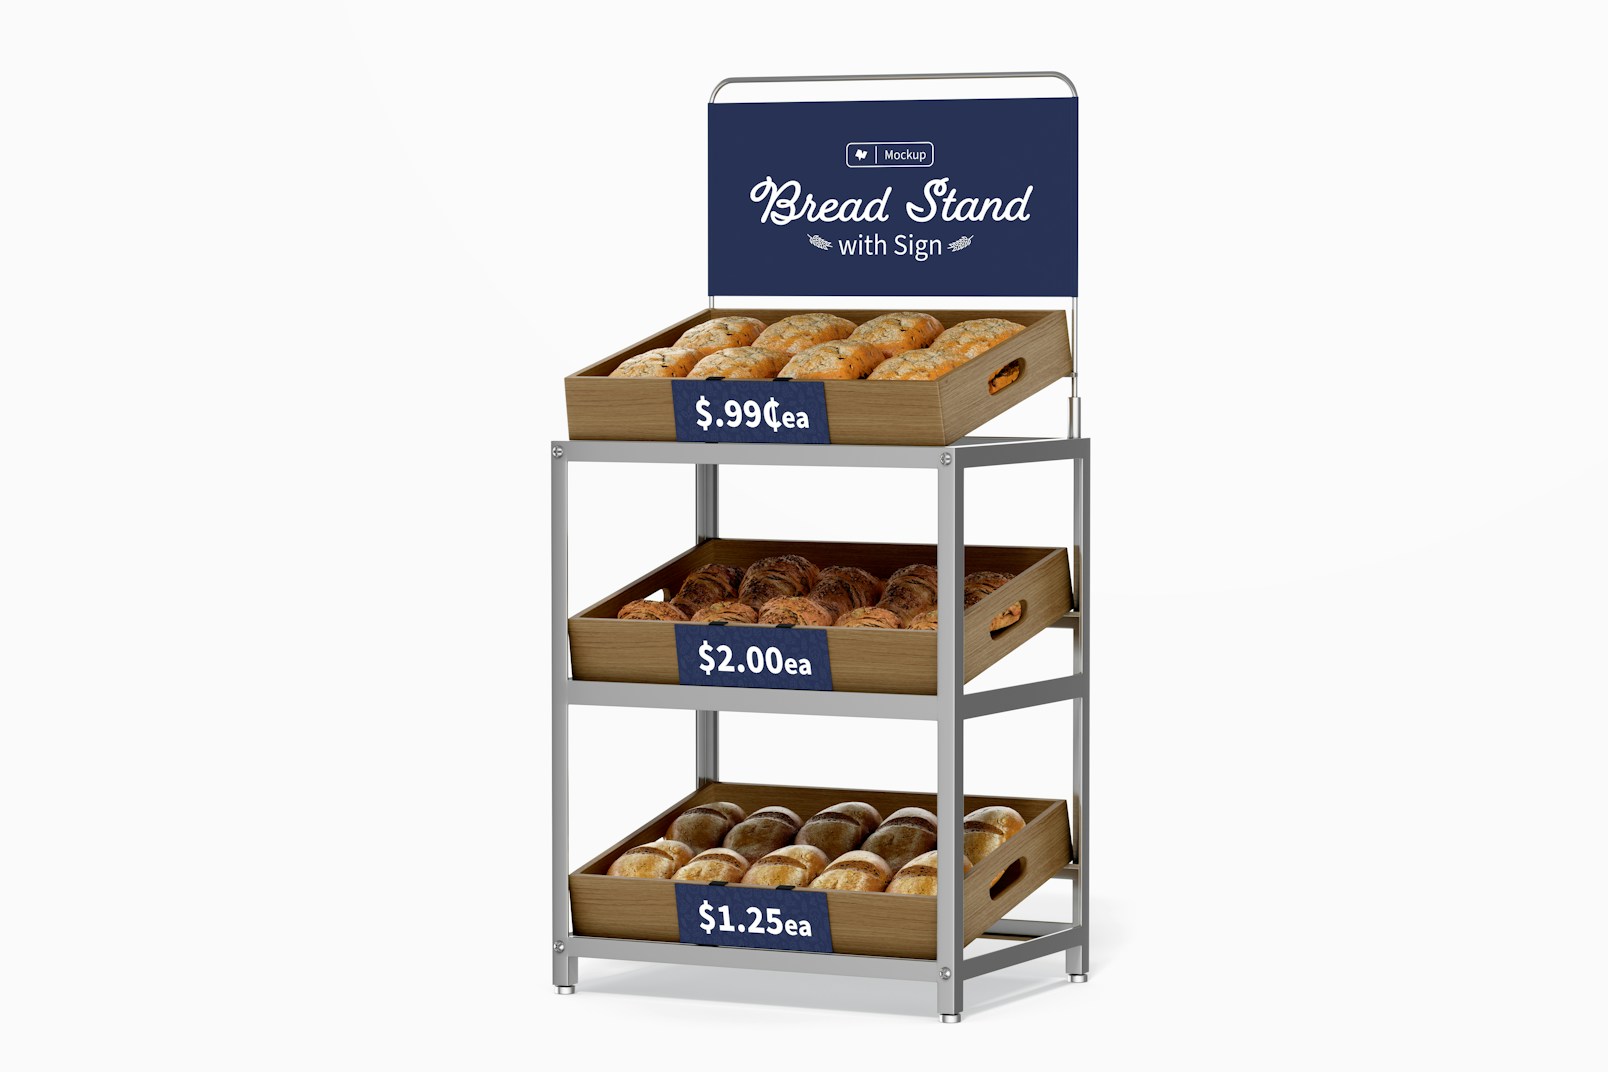 Bread Stand with Sign Mockup, Right View